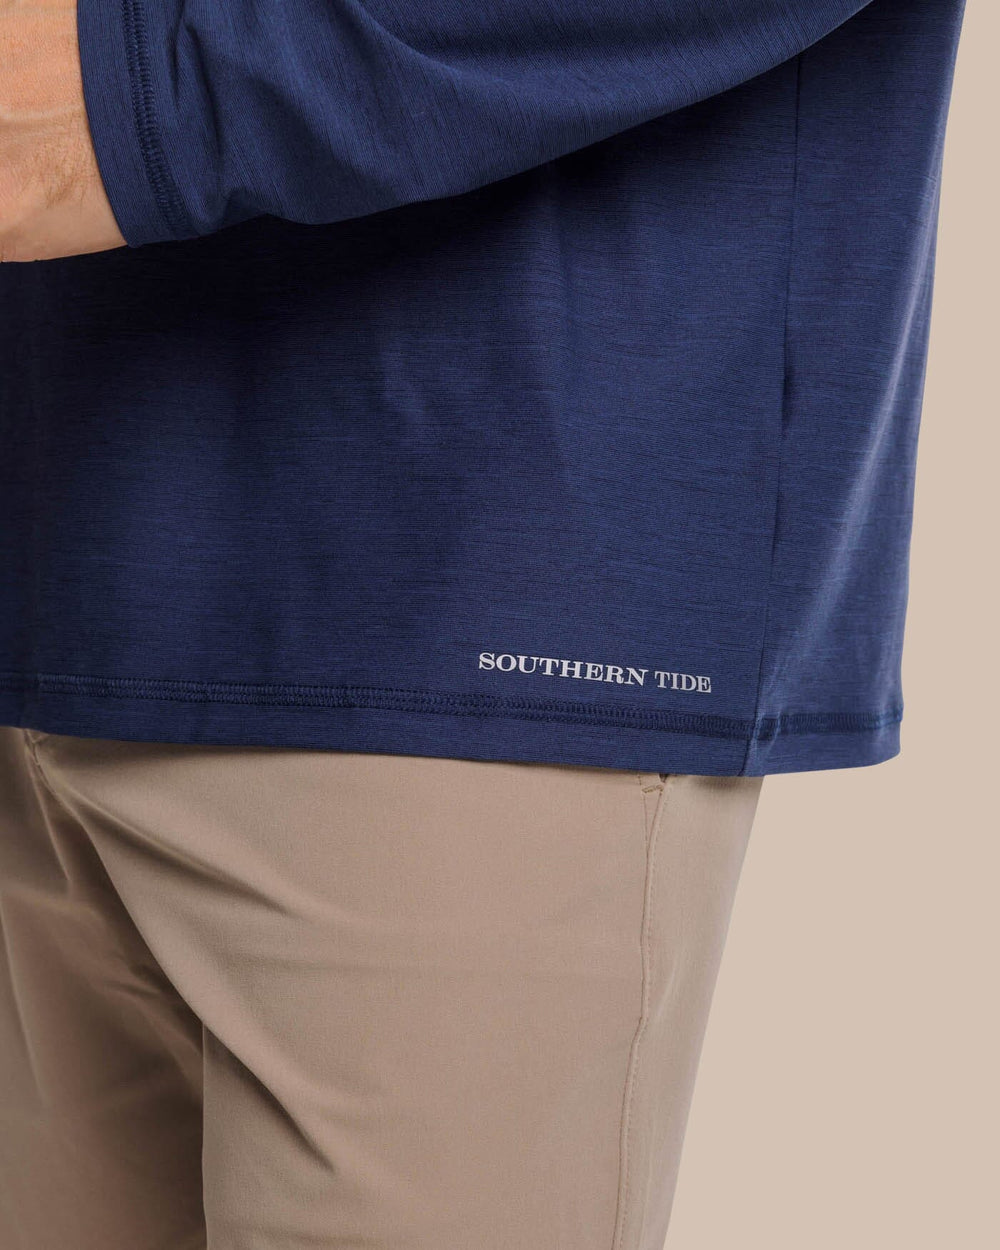 The detail view of the Southern Tide brrr°®-illiant Performance Hoodie by Southern Tide - Nautical Navy